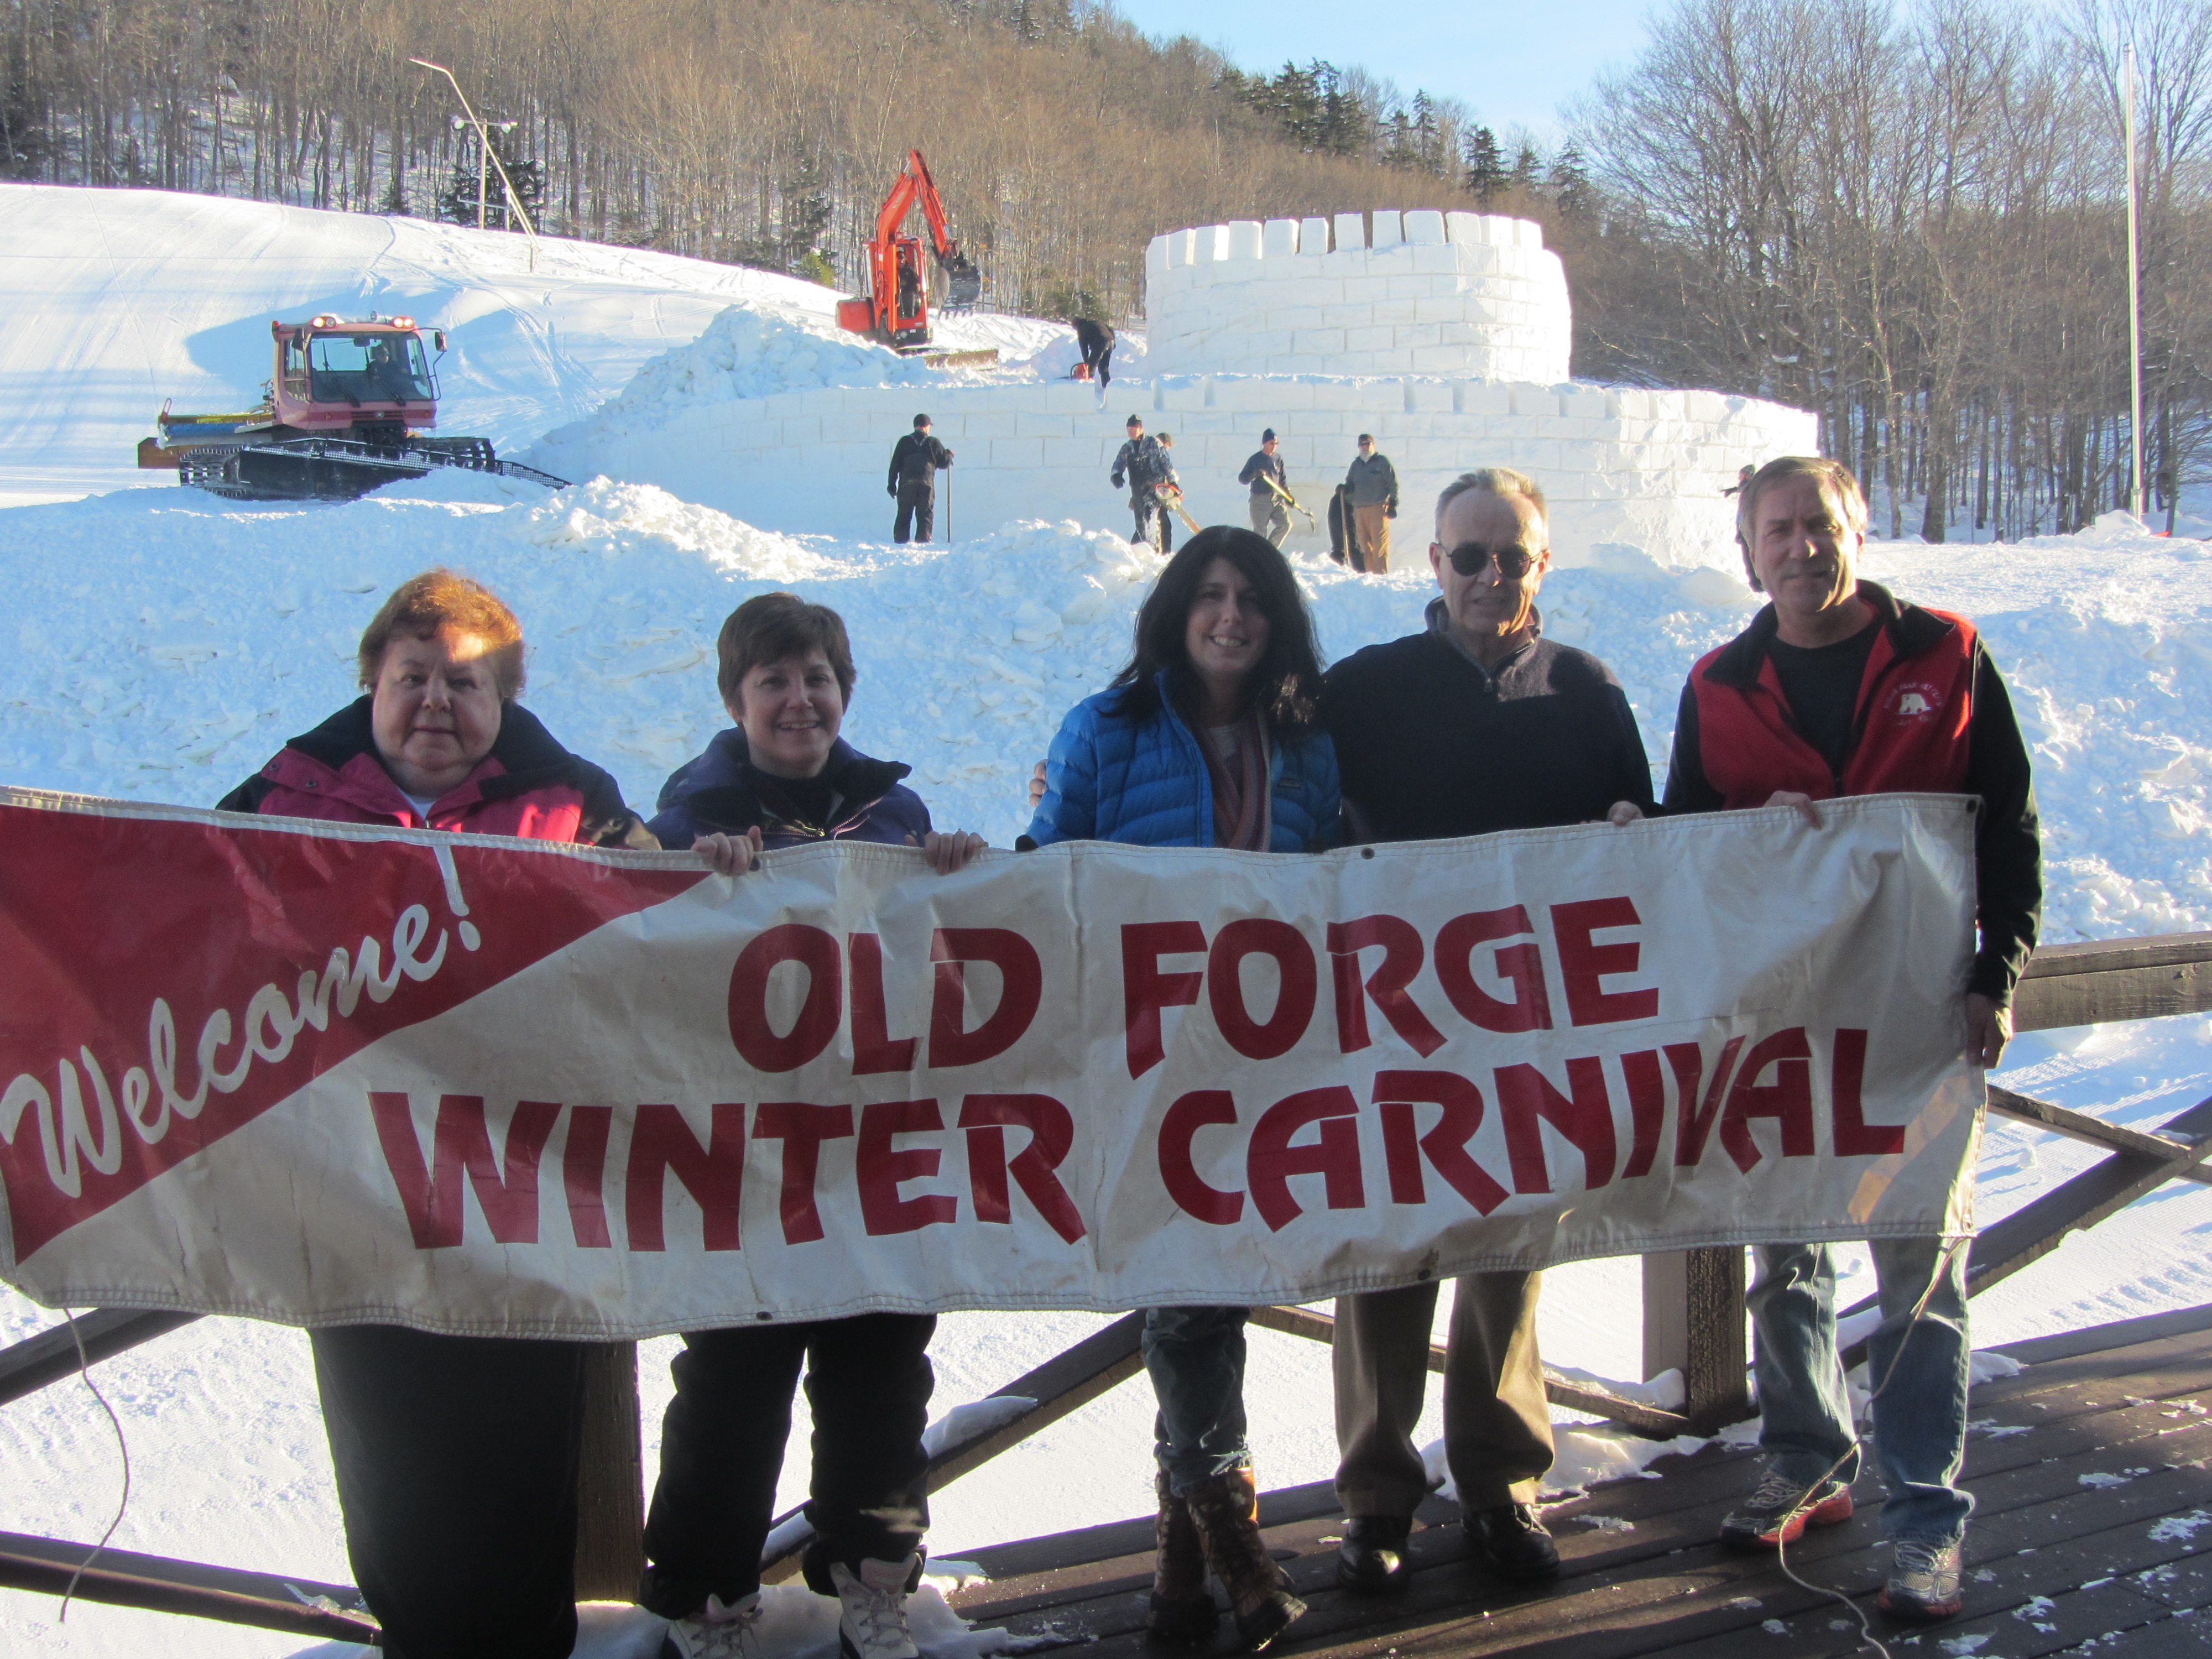 ’14 Old Winter Carnival to tip cap to Olympics, honor the memory